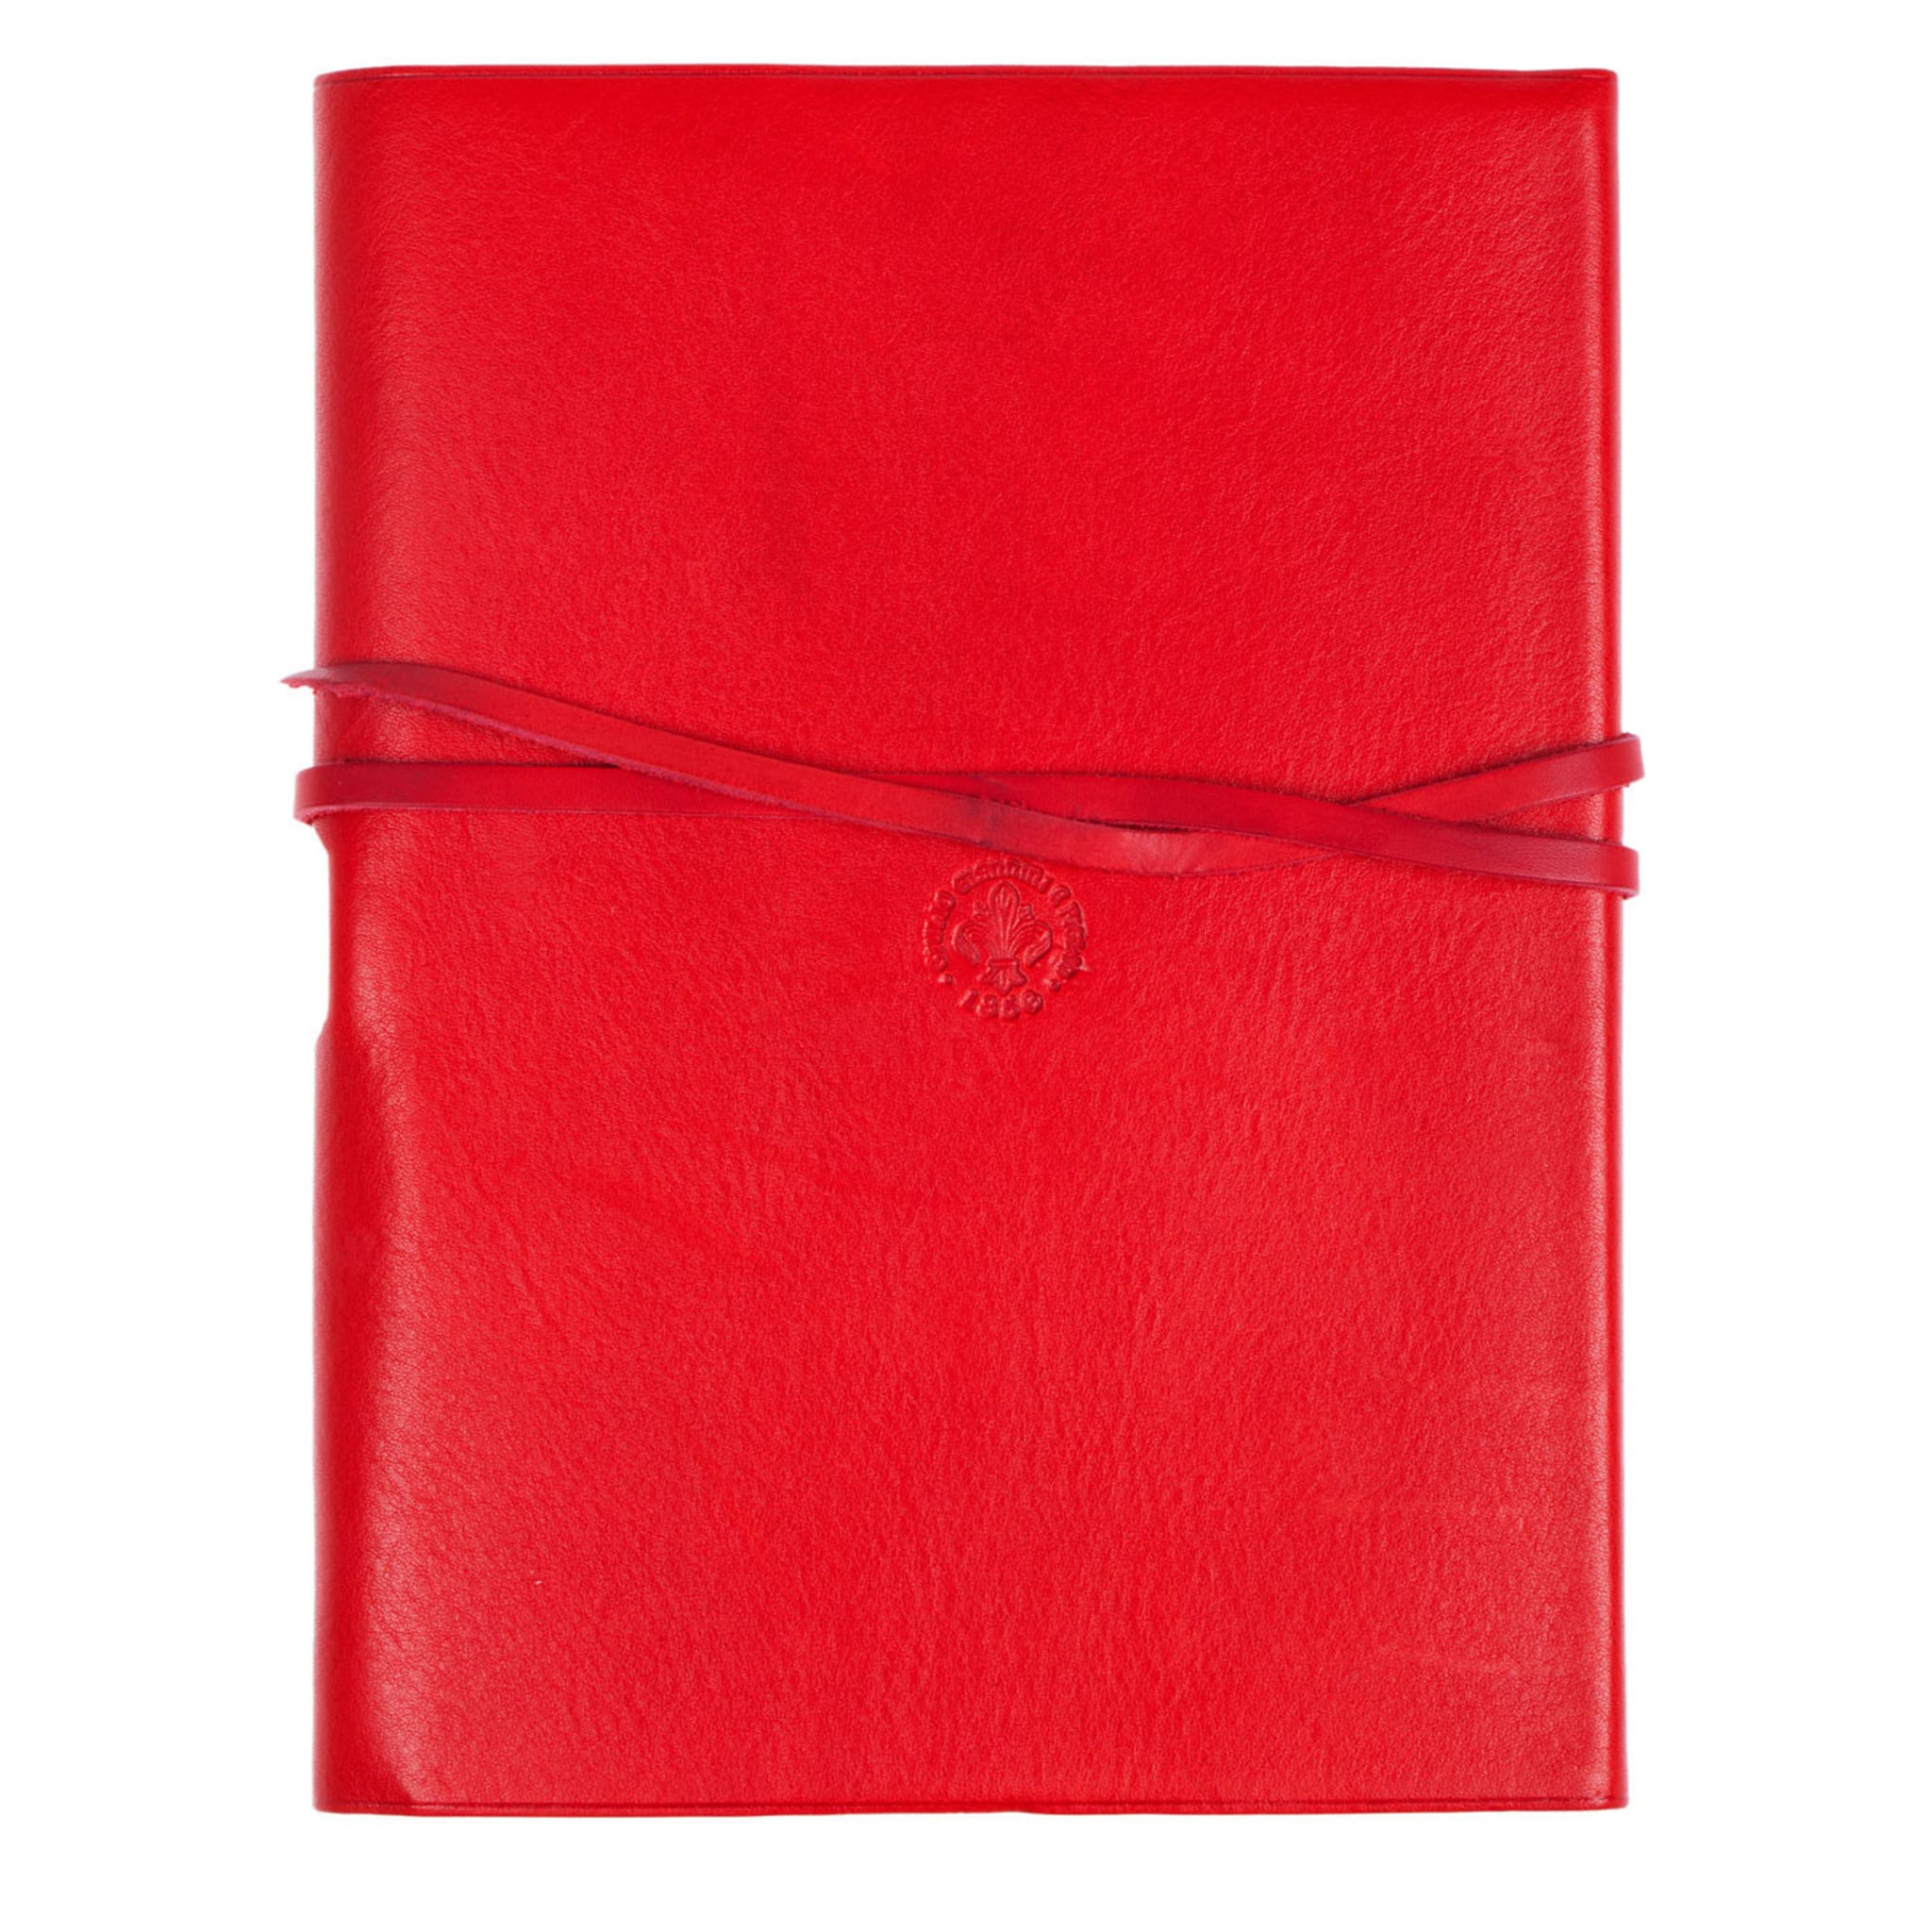 Lace Red Leather Notebook - Alternative view 3